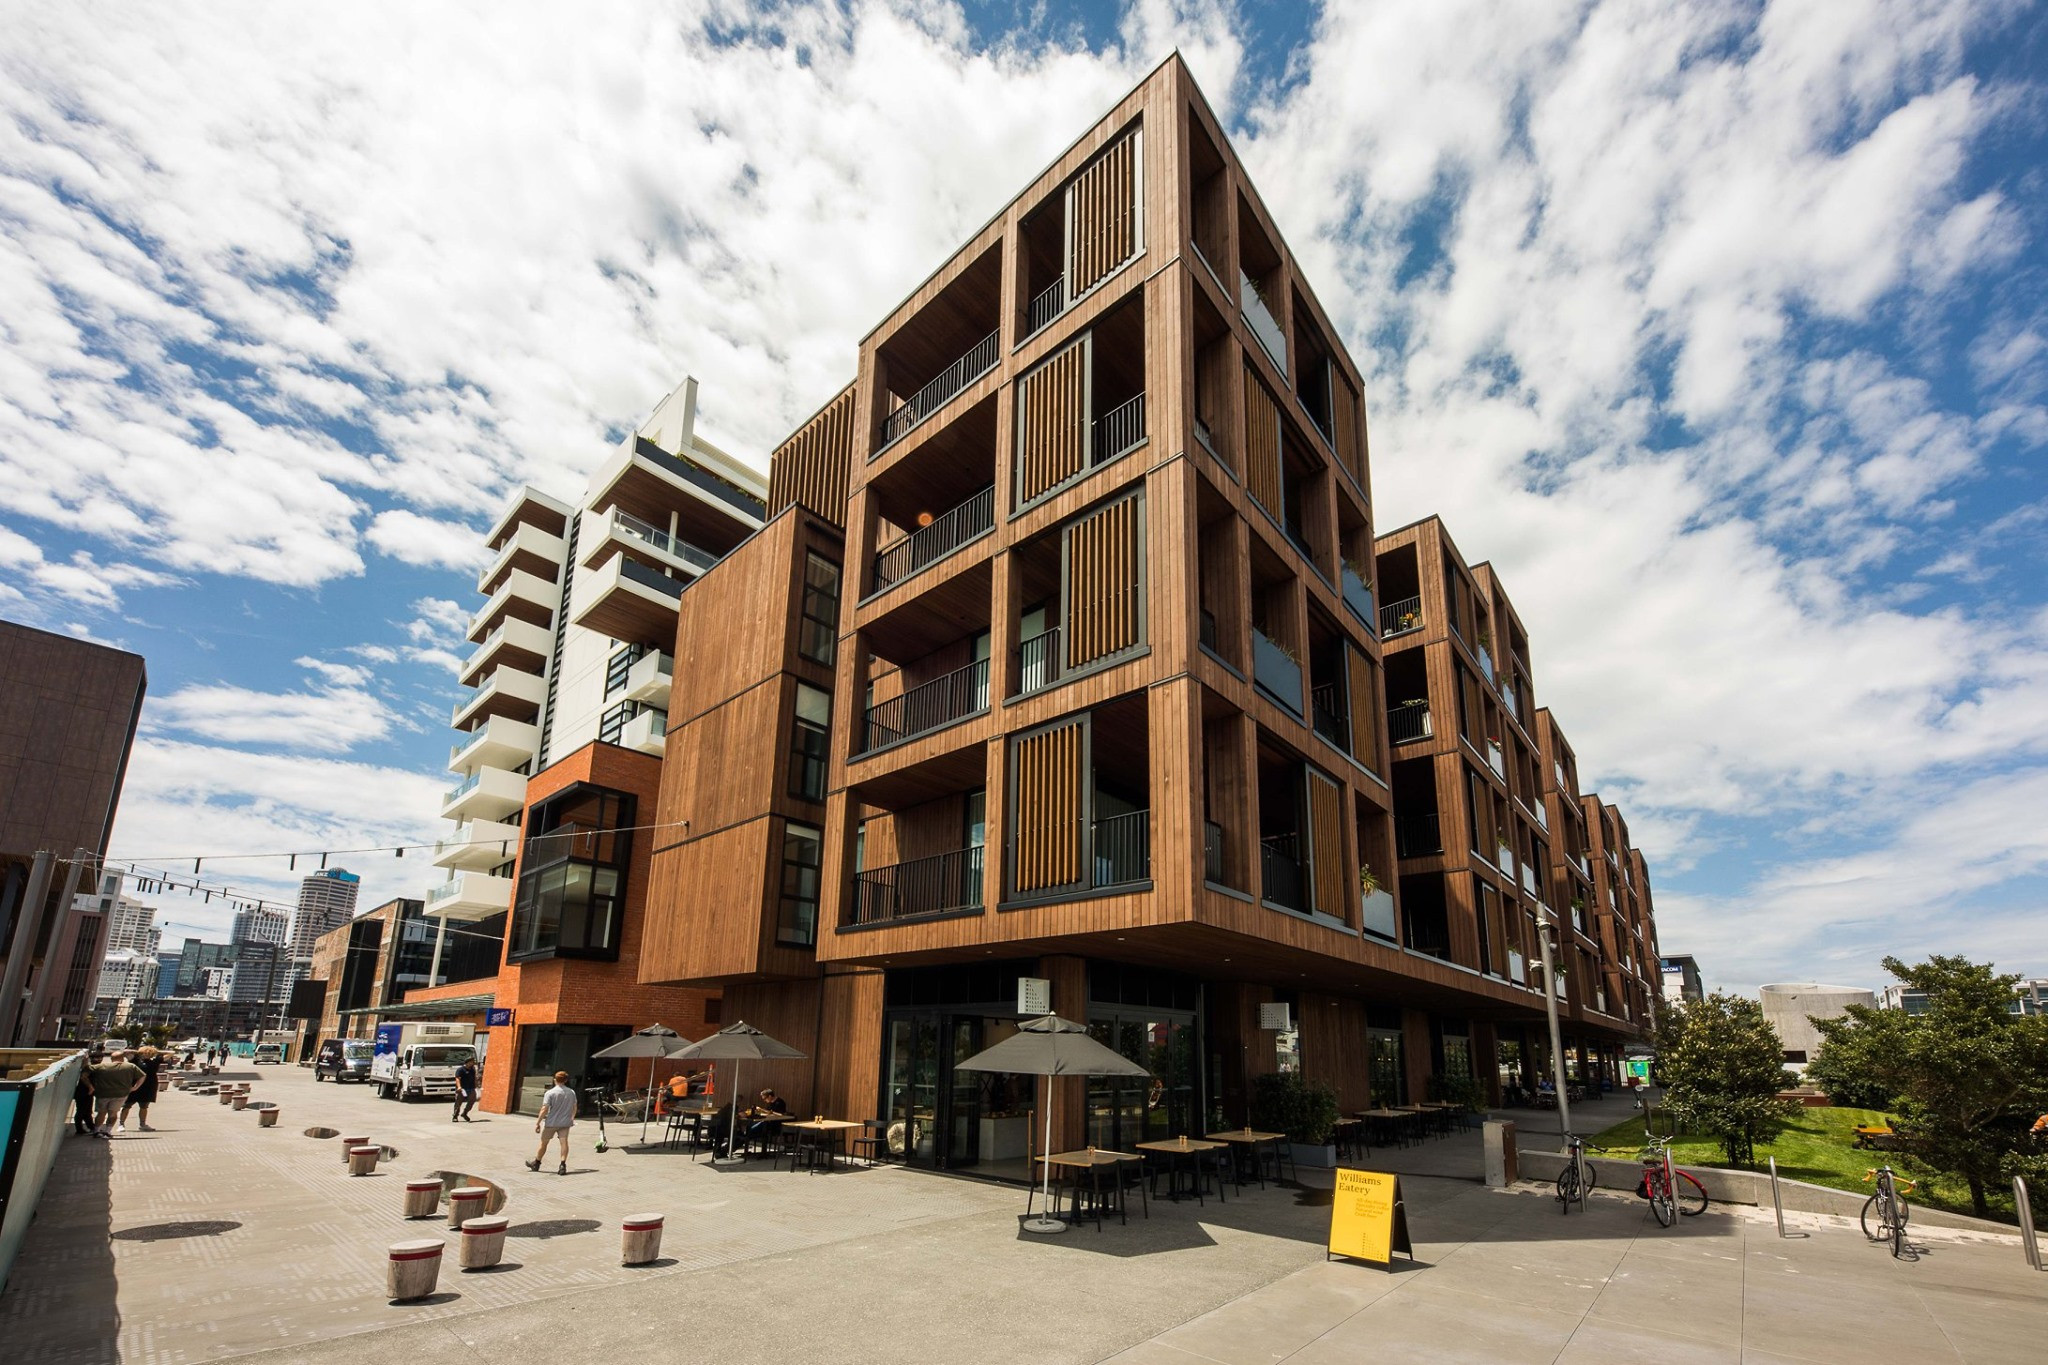 Contemporary urban housing with wooden facade and glass safety railings